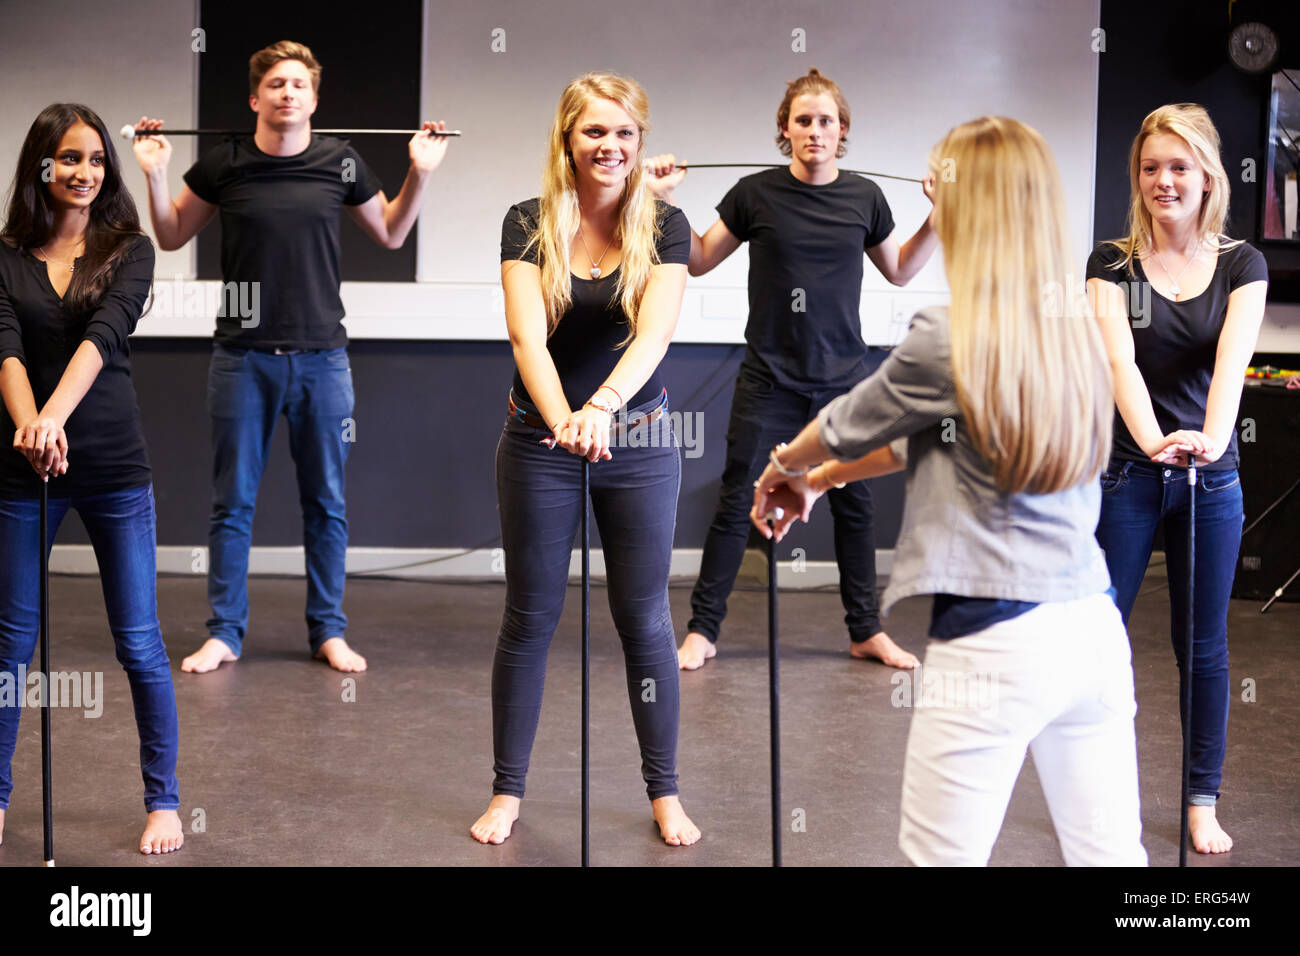 Students Taking Dance Class At Drama College Stock Photo